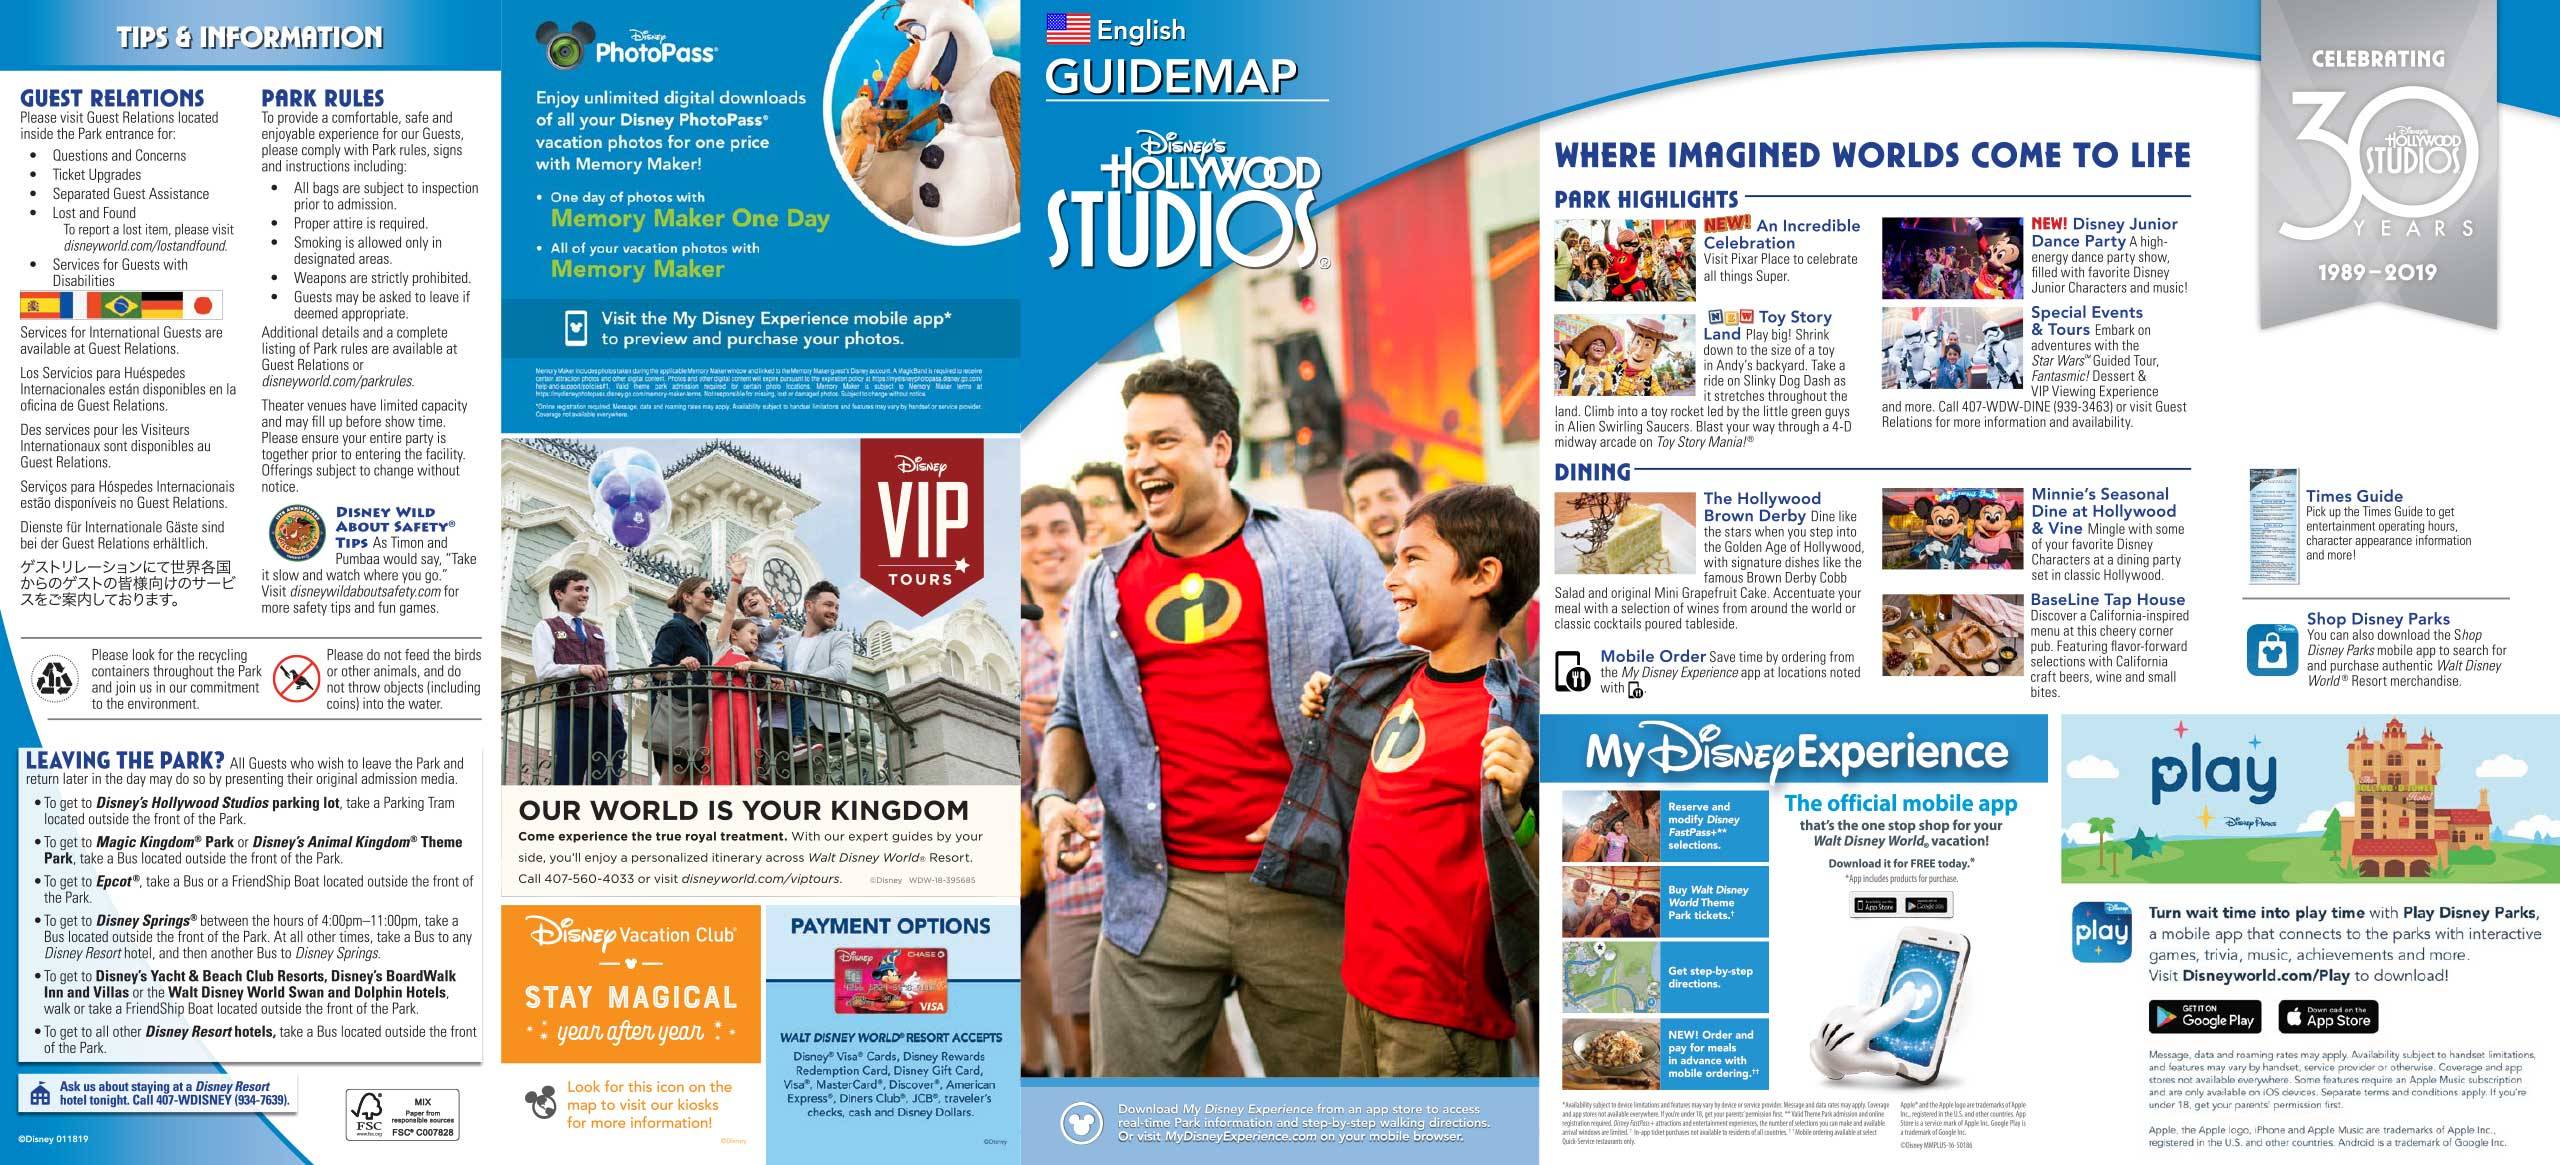 Disney's Hollywood Studios Guide Map January 2019 - Front